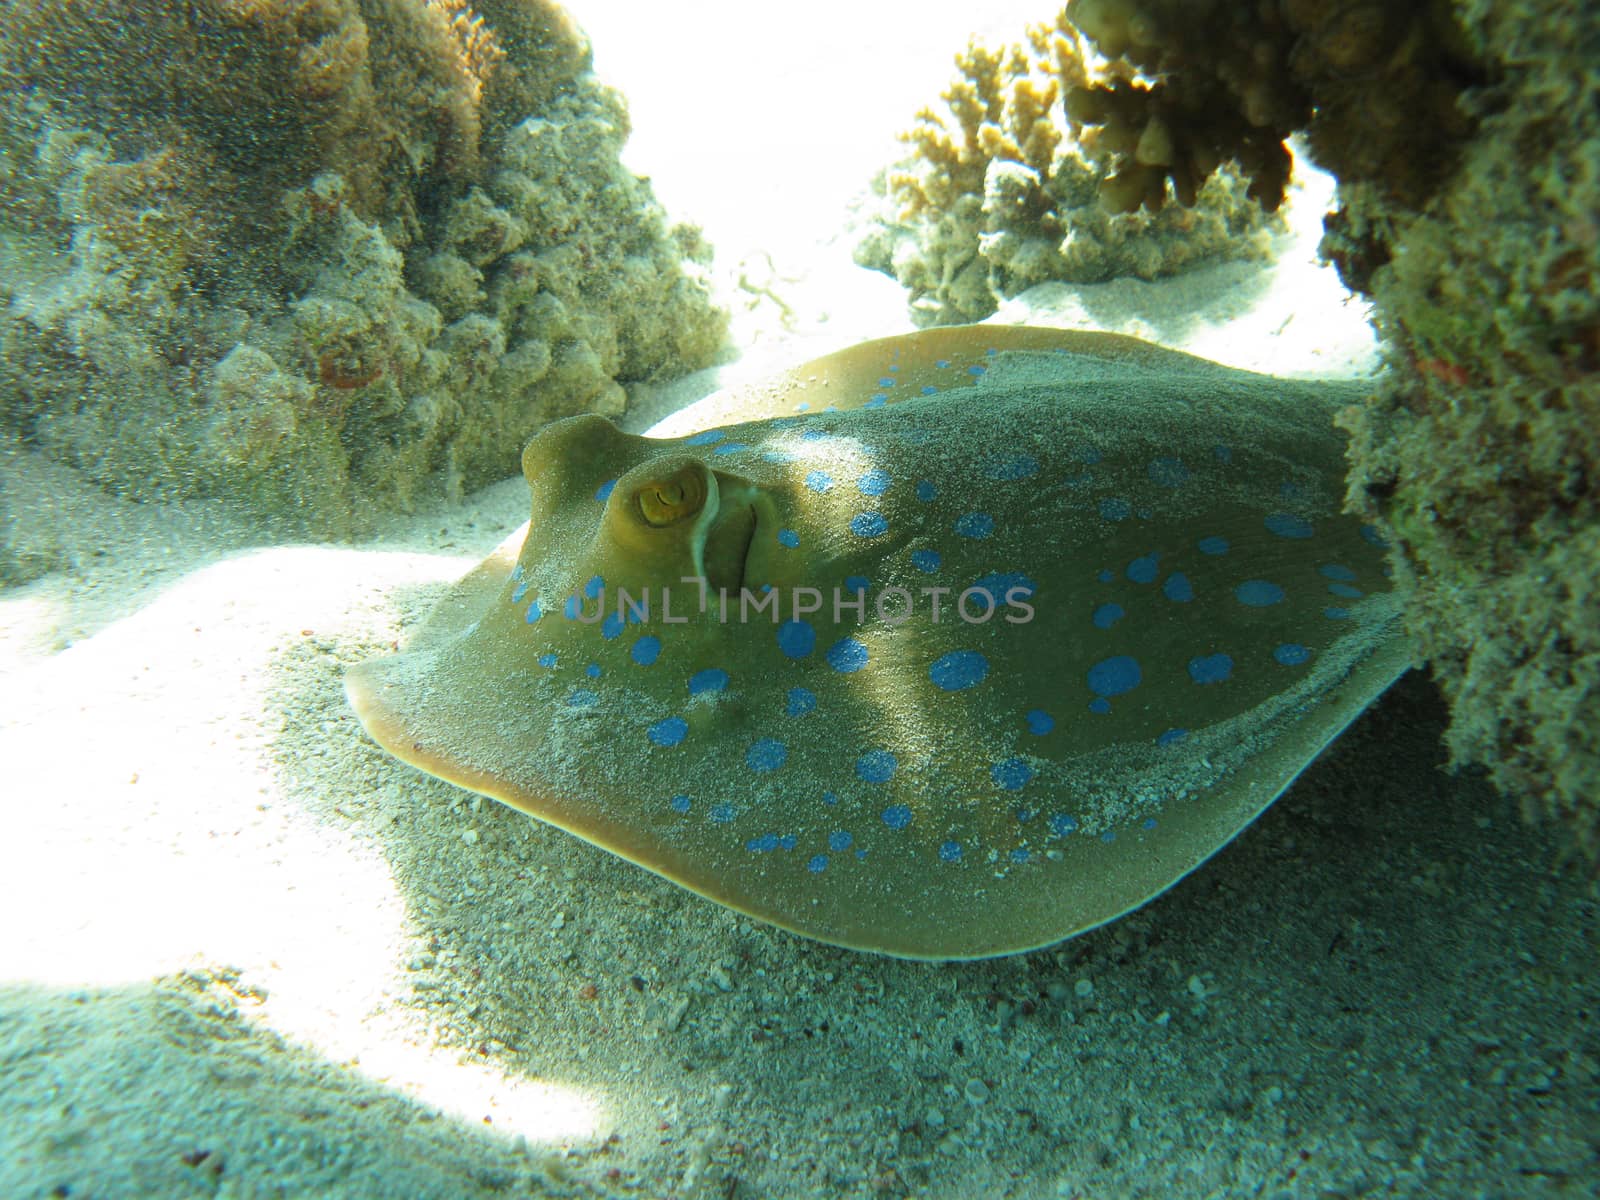 bluespotted ribbontail ray in tropical sea - underwater by mychadre77